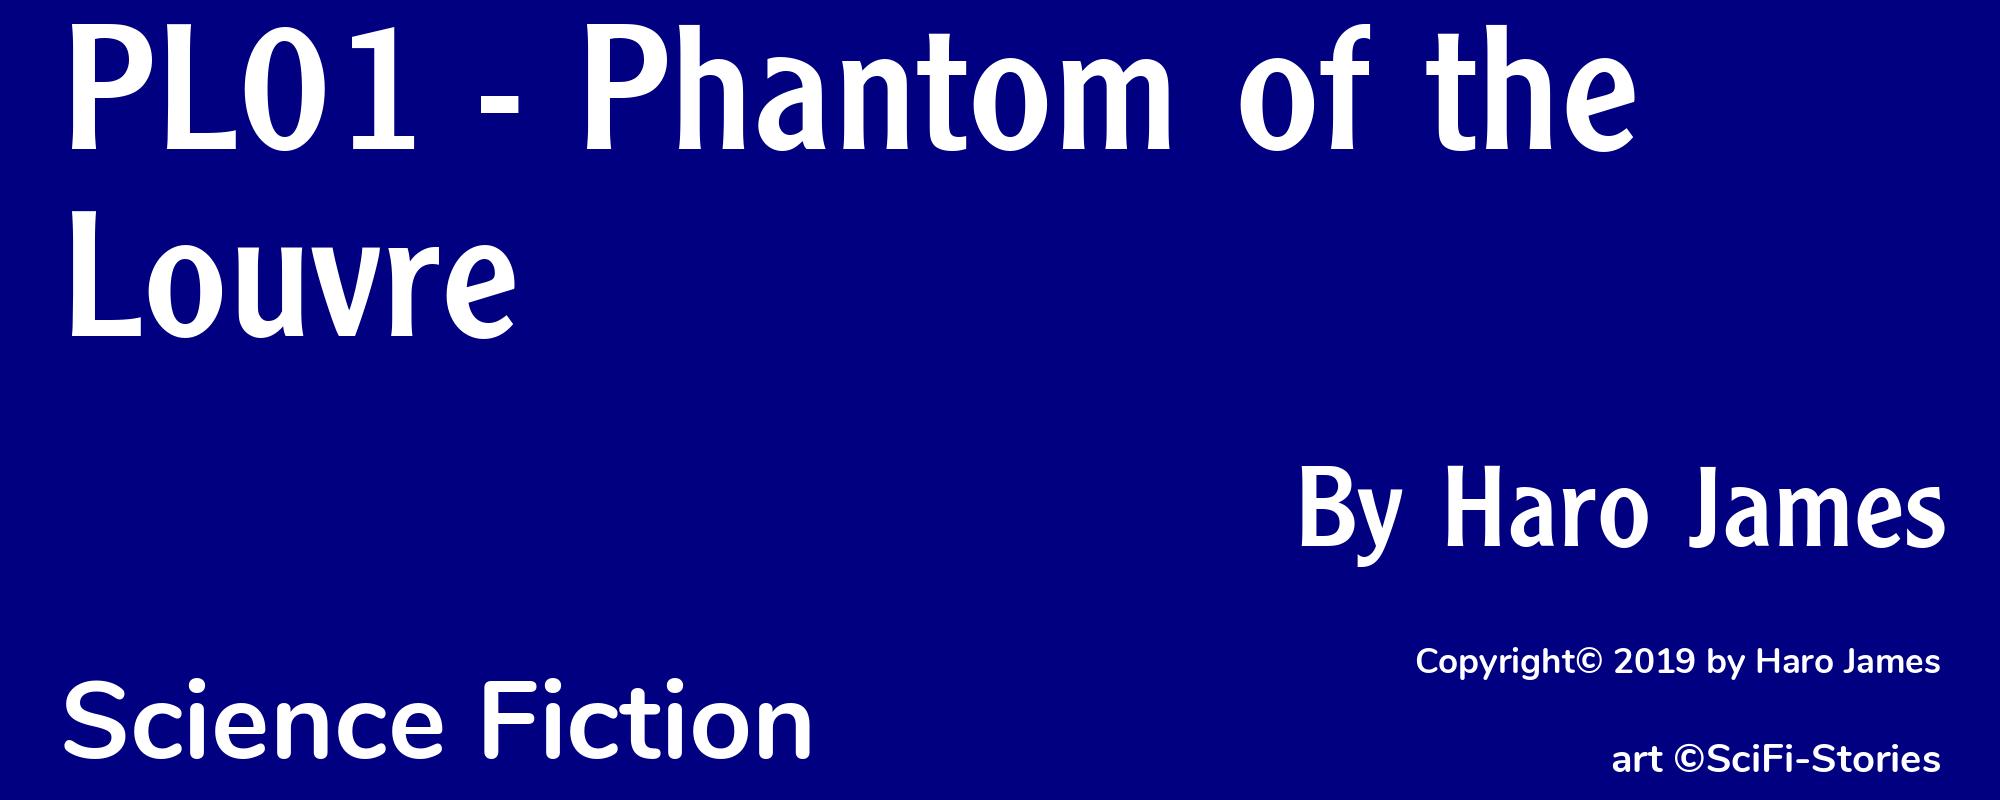 PL01 - Phantom of the Louvre - Cover